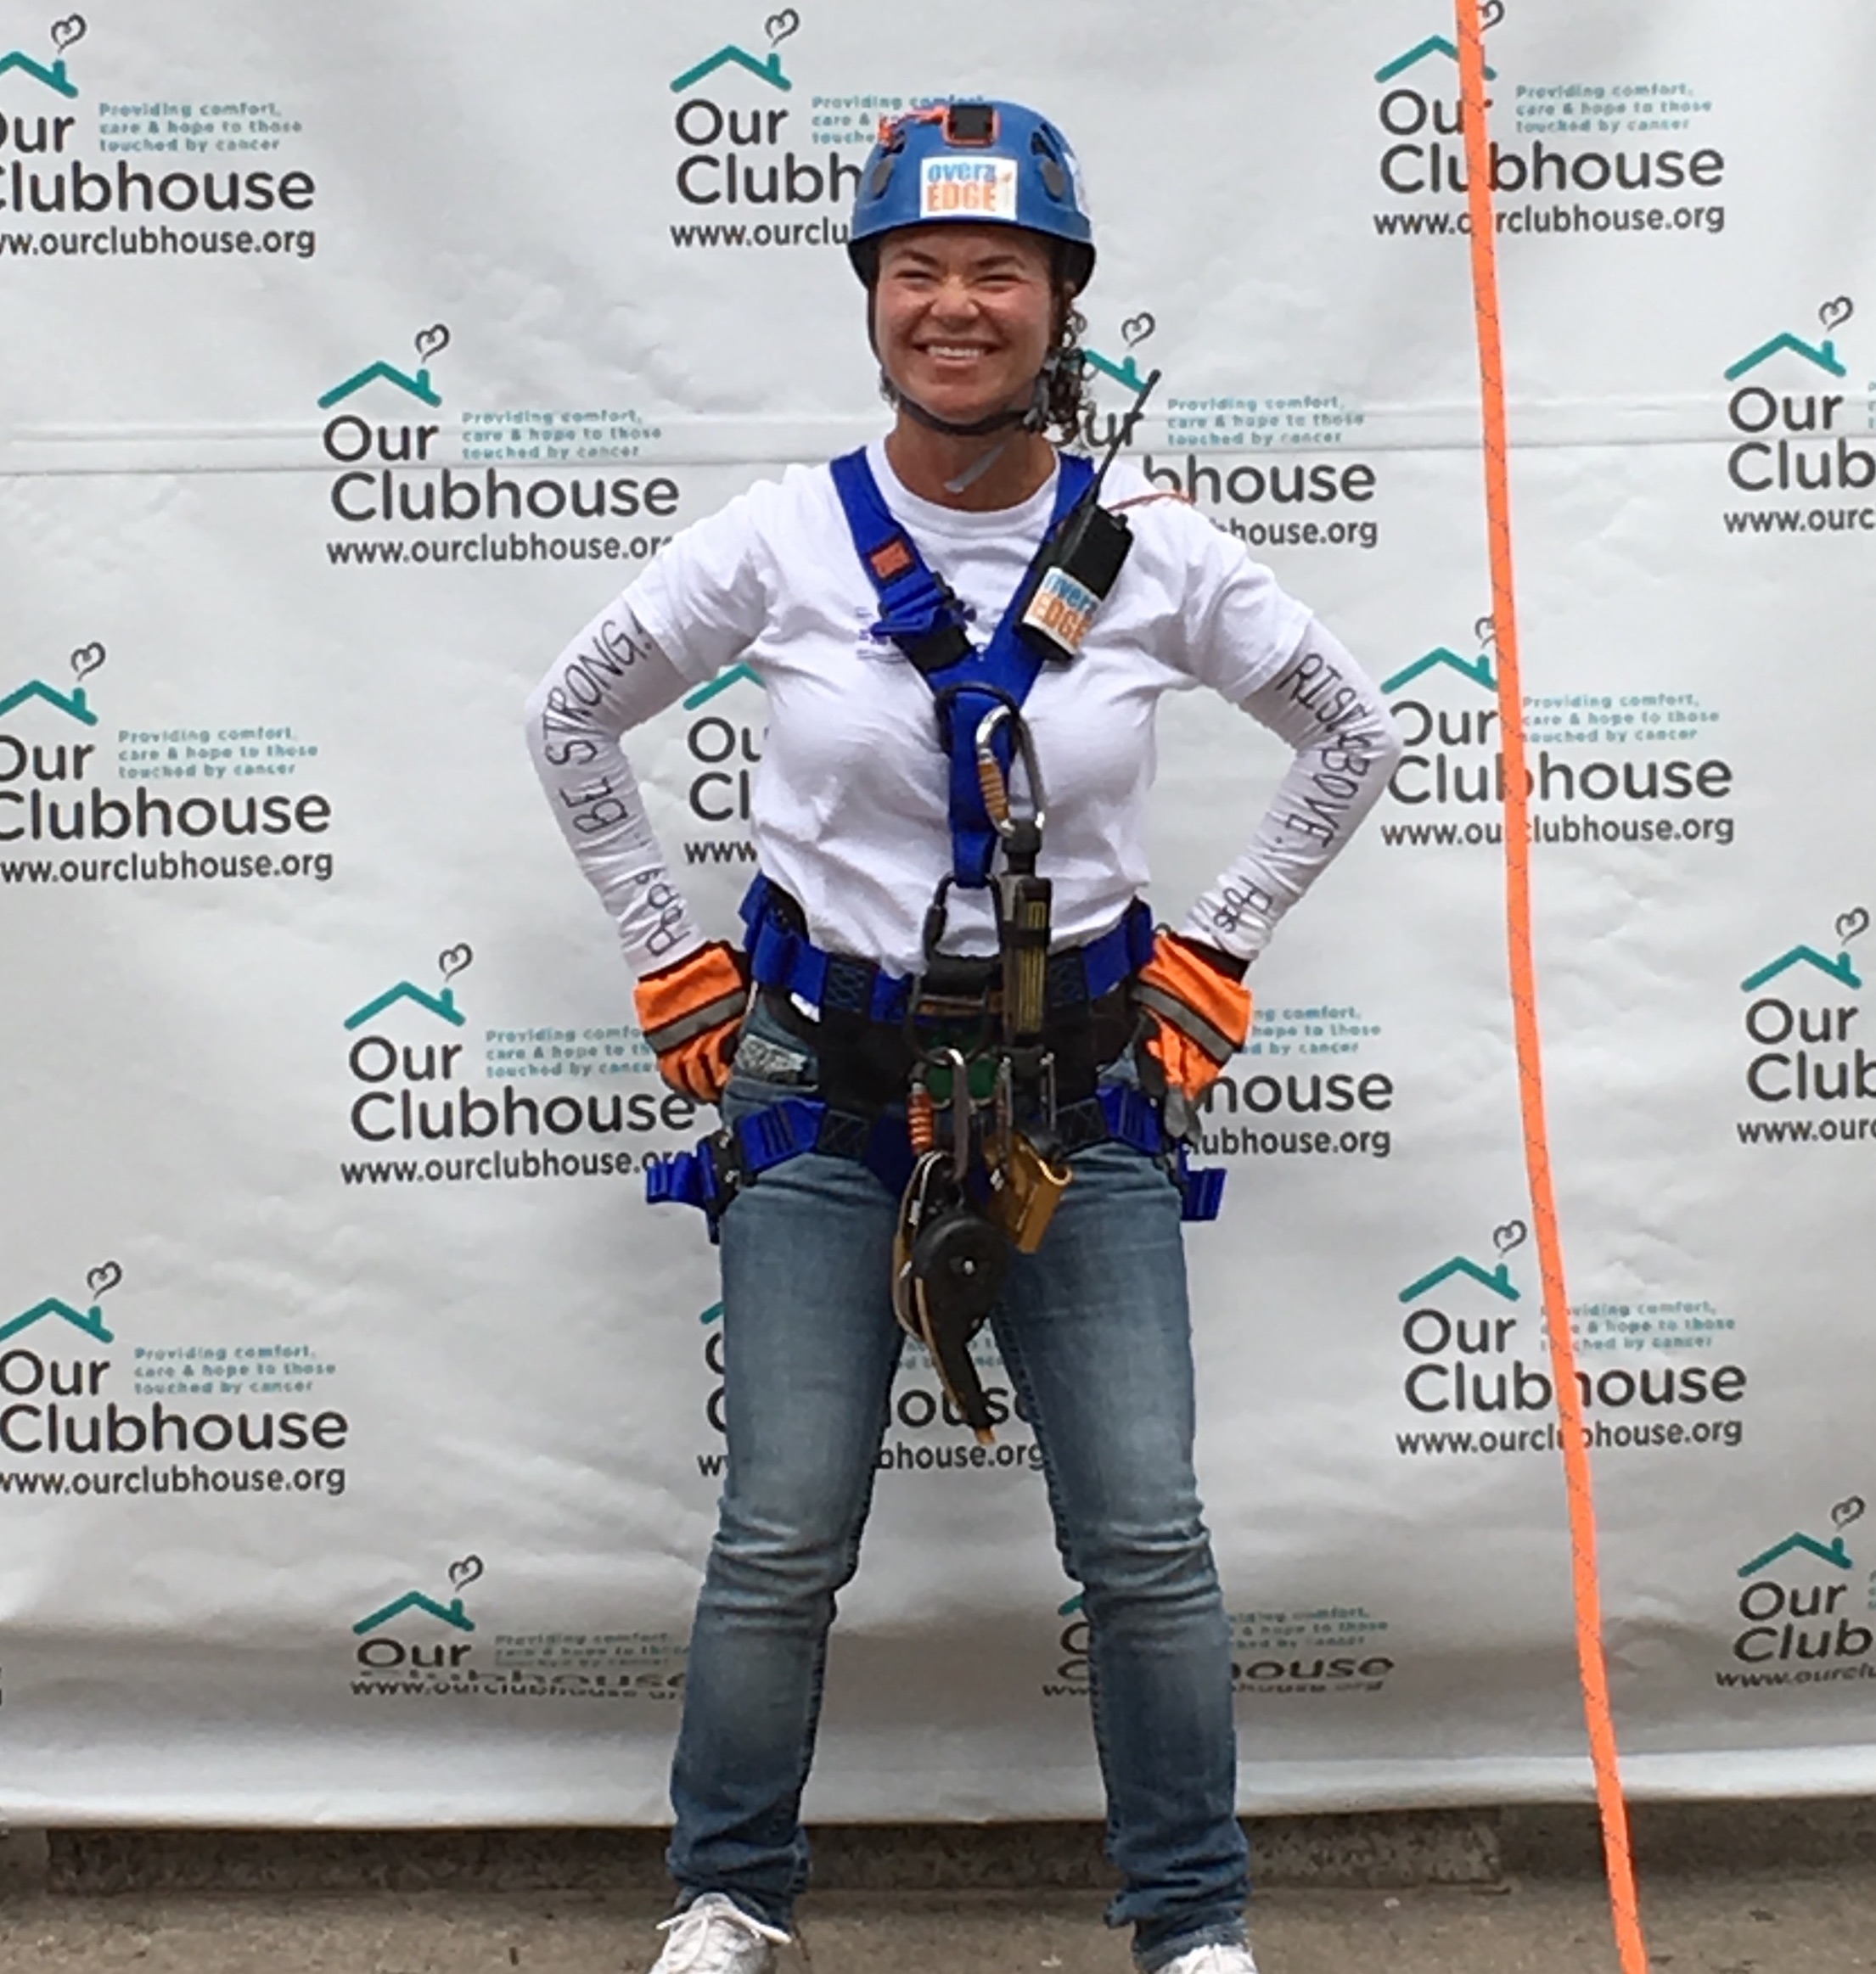 Smorey Giger Law fundraises for Our Clubhouse and goes “Over the Edge” 26 stories of the Oliver Building